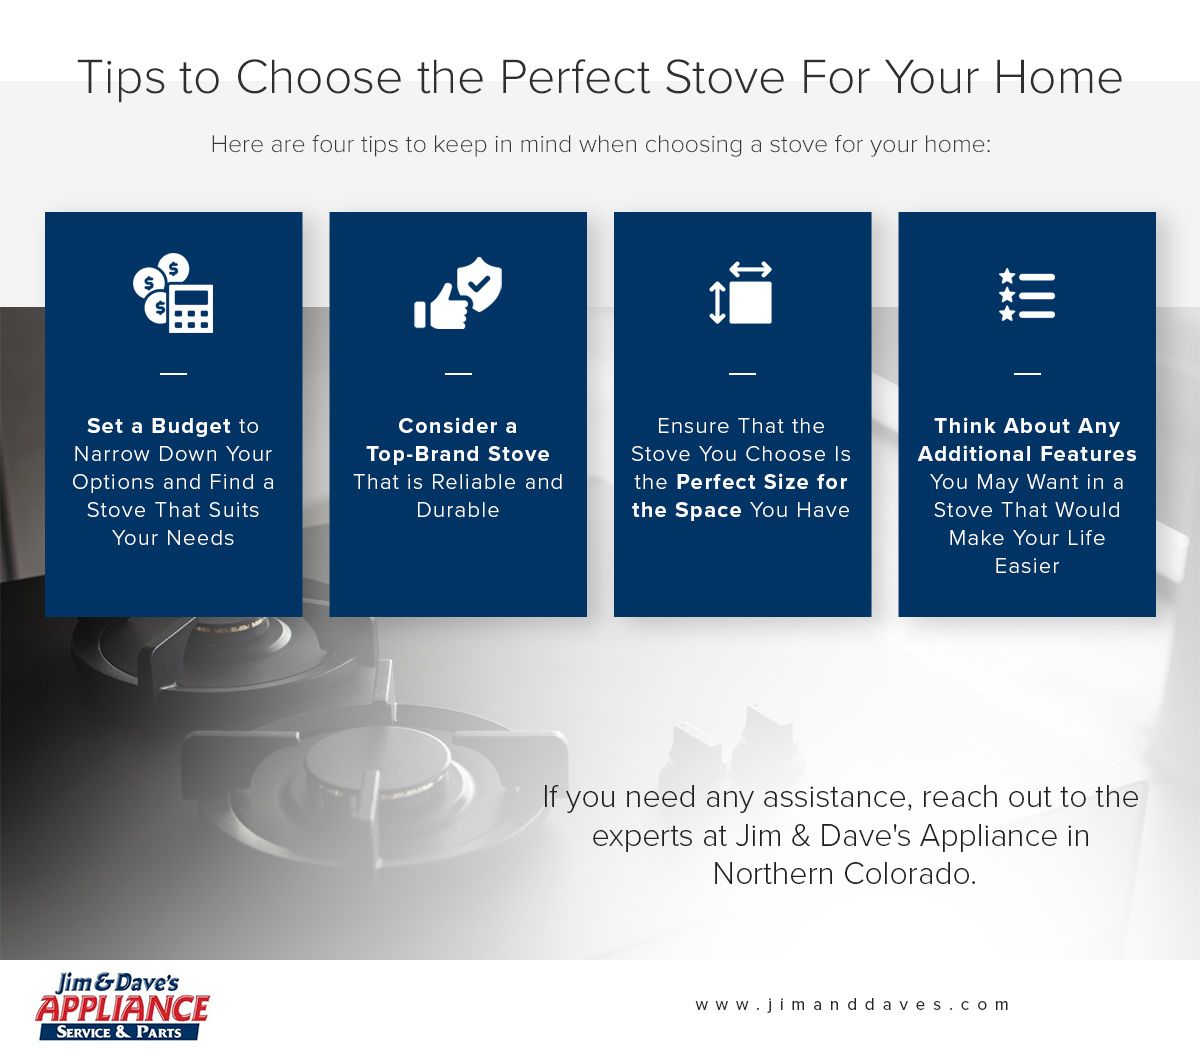 Tips-to-Choose-the-Perfect-Stove-infographic.jpg